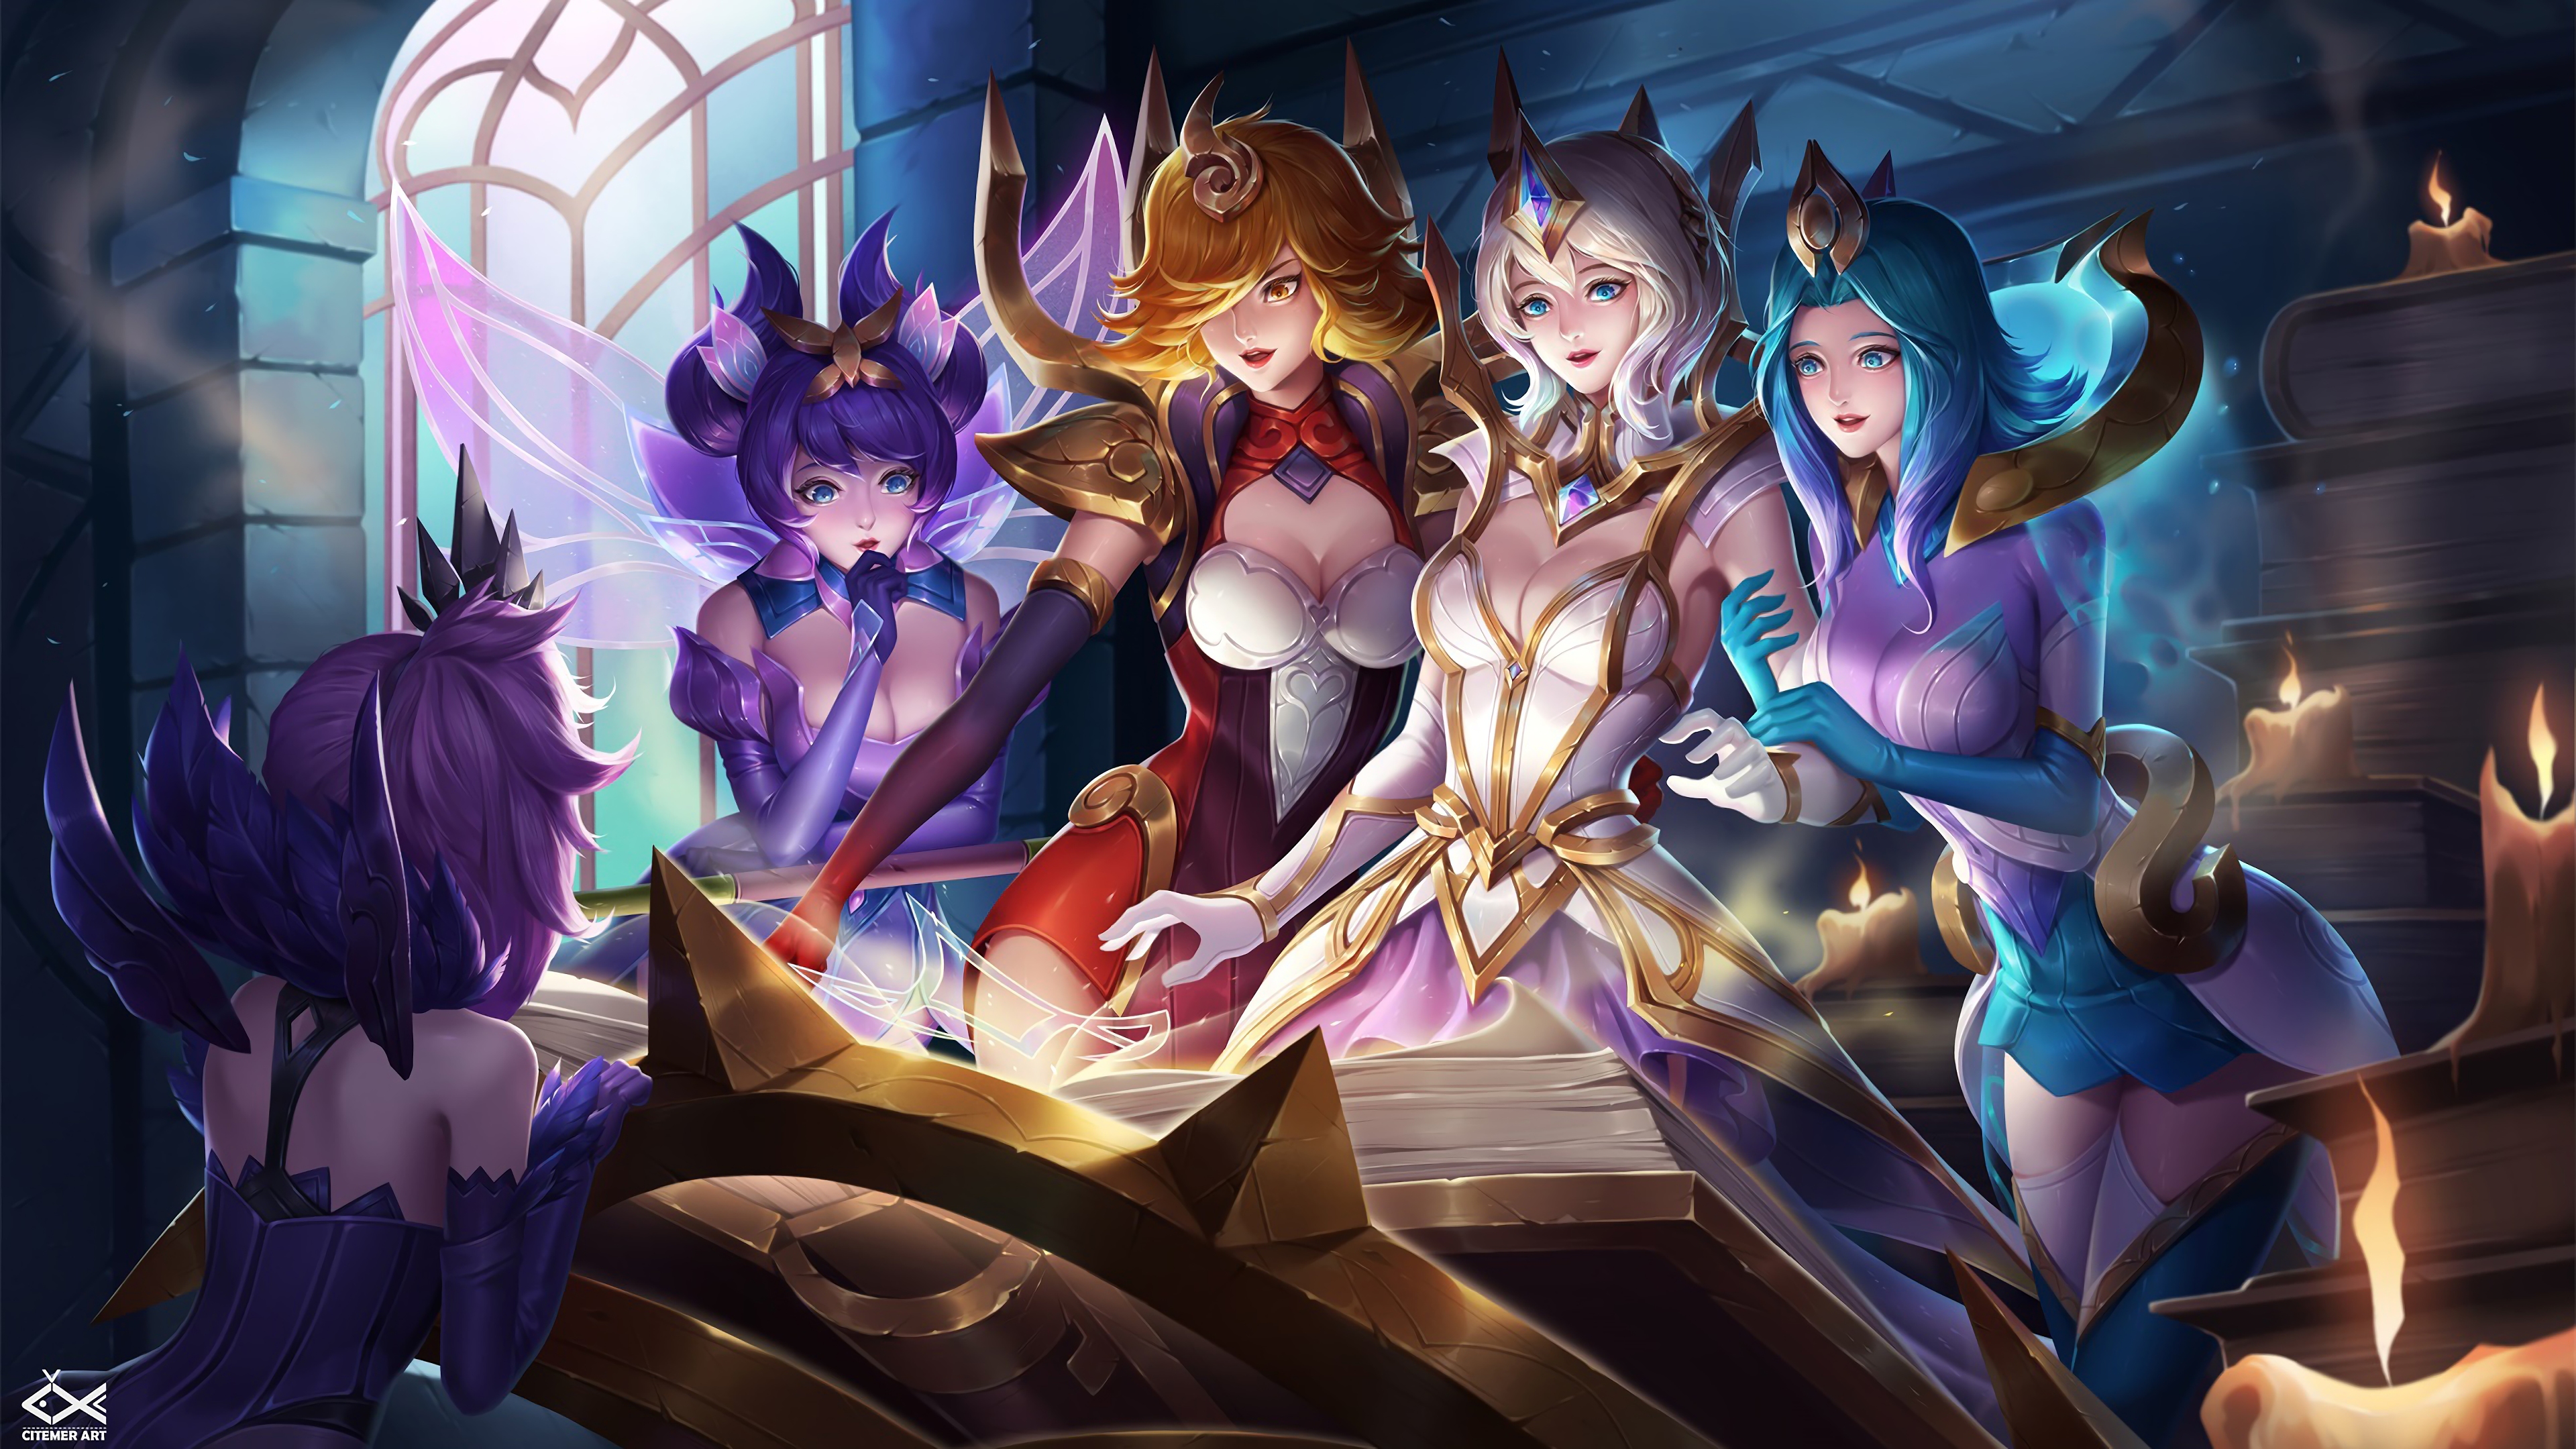 General 3840x2160 League of Legends video games Lux (League of Legends) Citemer Liu video game girls boobs cleavage video game characters PC gaming women group of women fantasy art fantasy girl